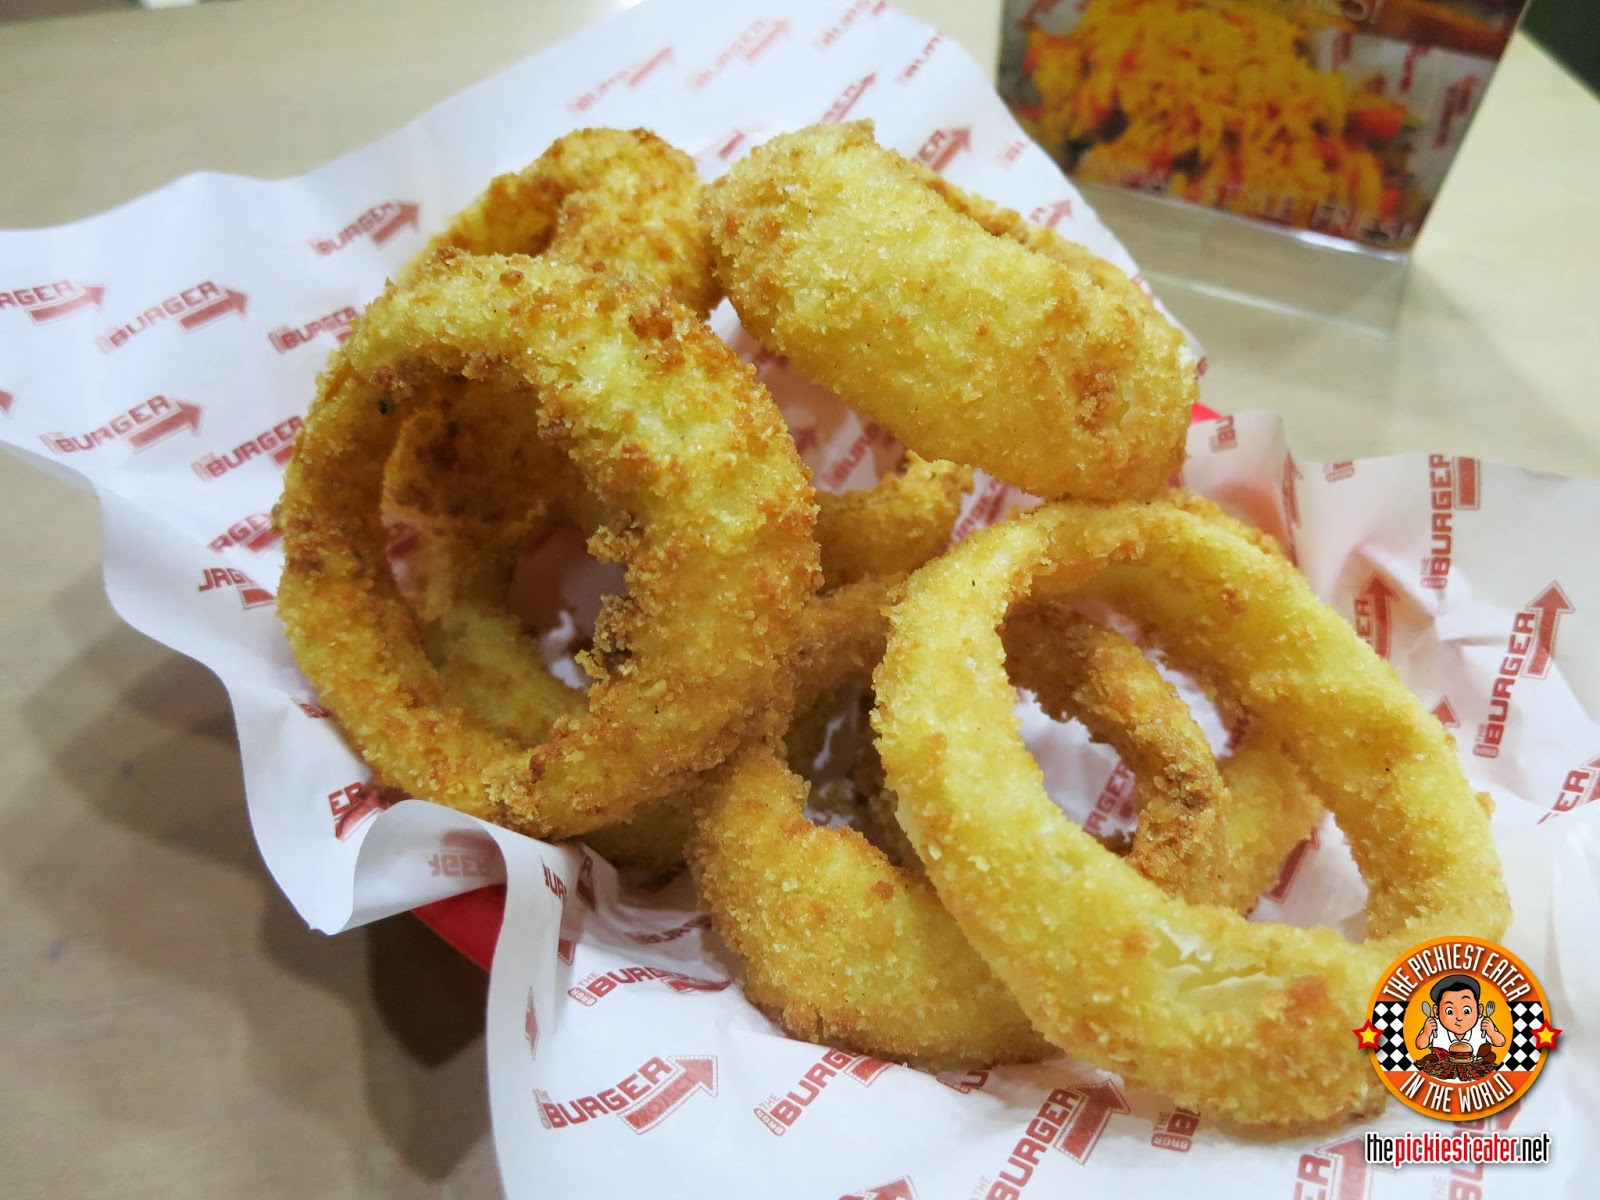 BRGR Project Makati onion rings